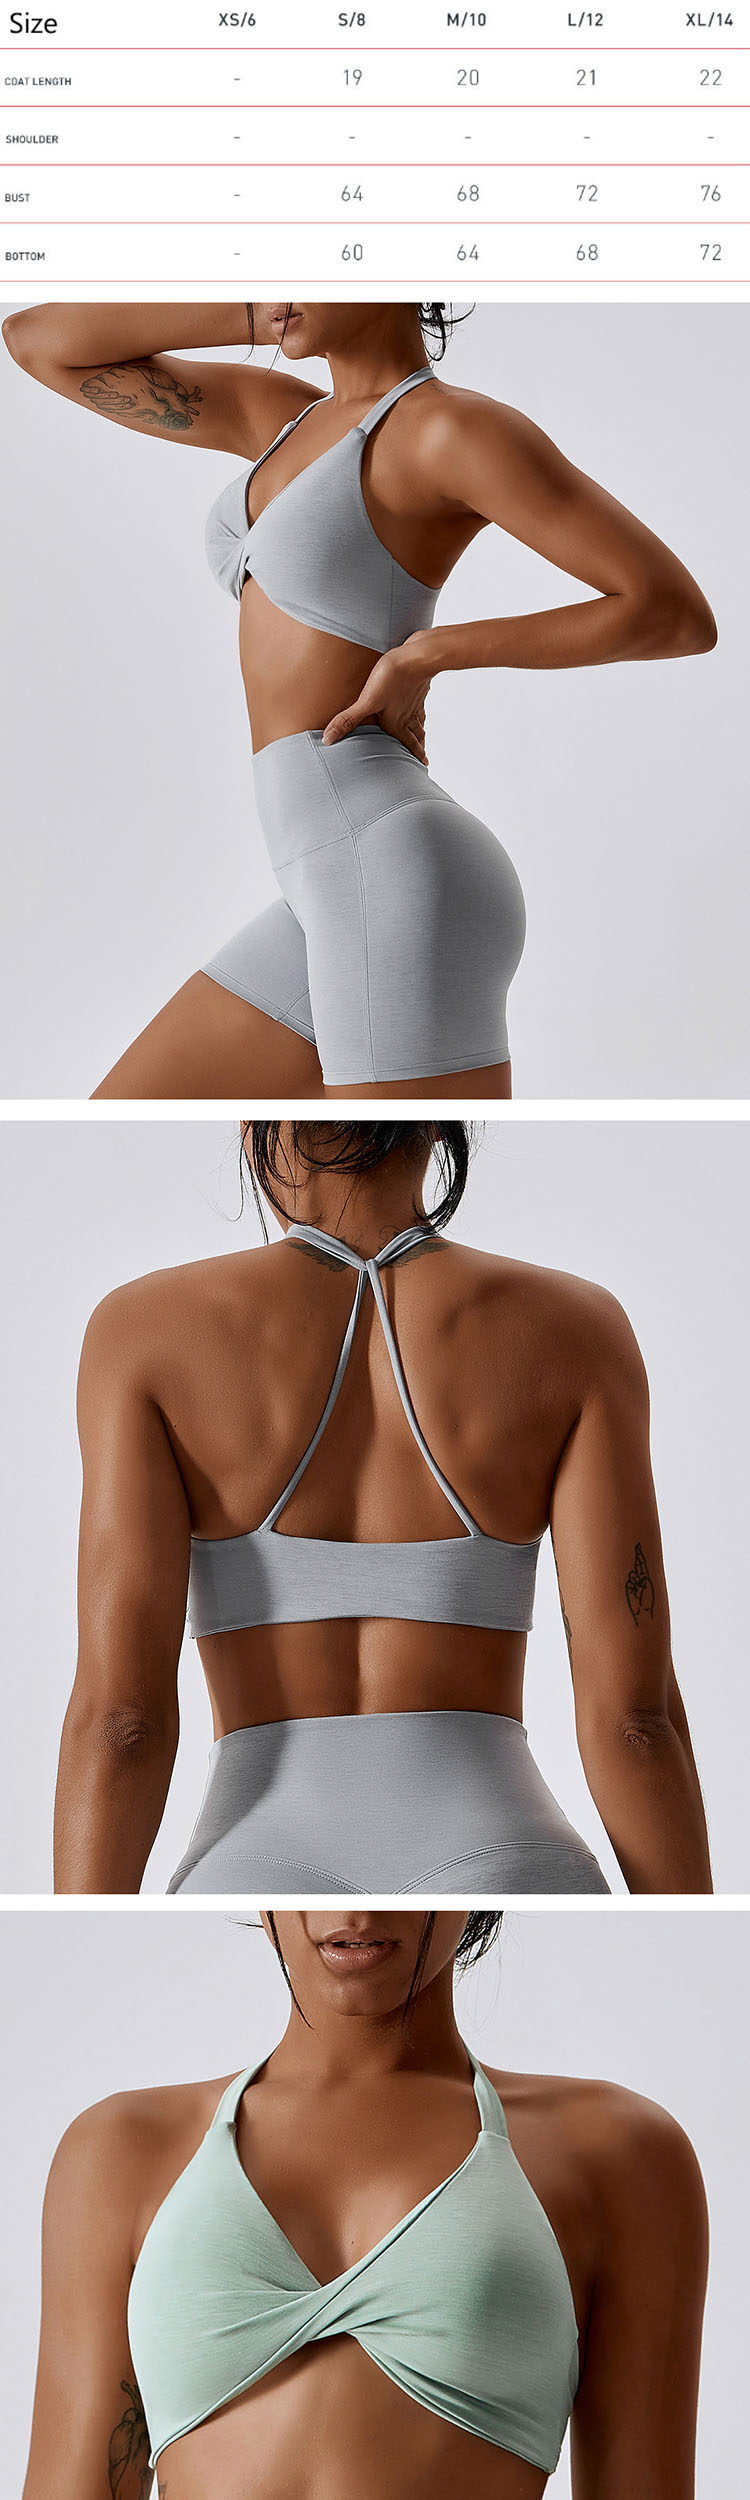 Soft sports bras put the emphasis on the rear of the design